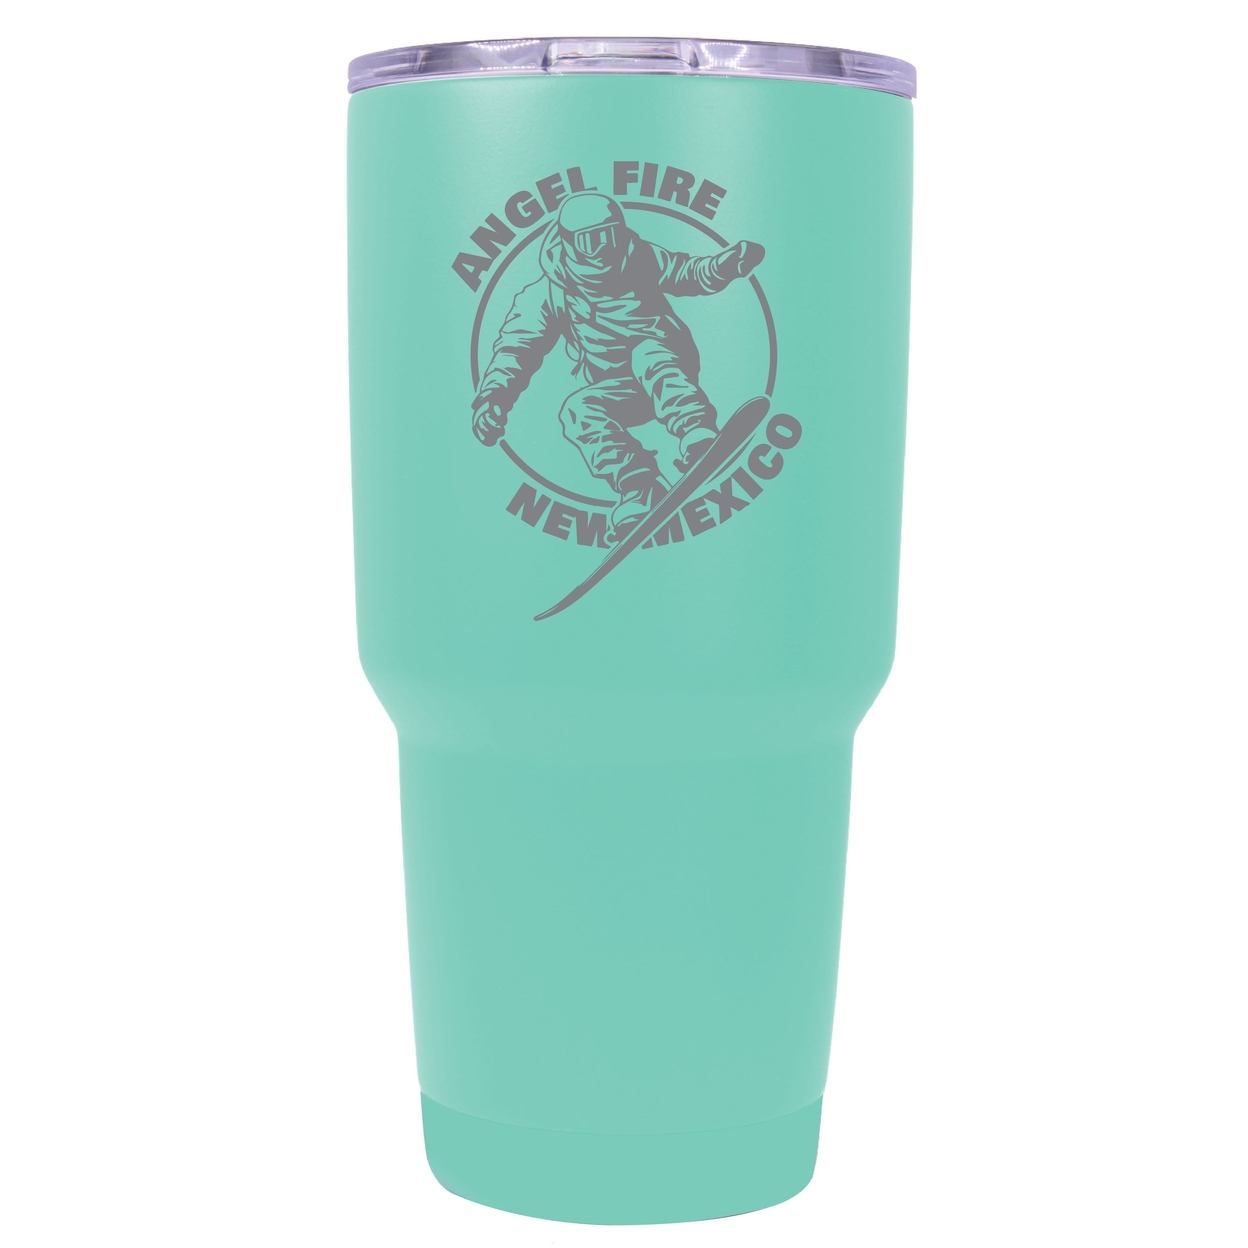 Angel Fire New Mexico Souvenir 24 Oz Engraved Insulated Stainless Steel Tumbler - Red,,Single Unit